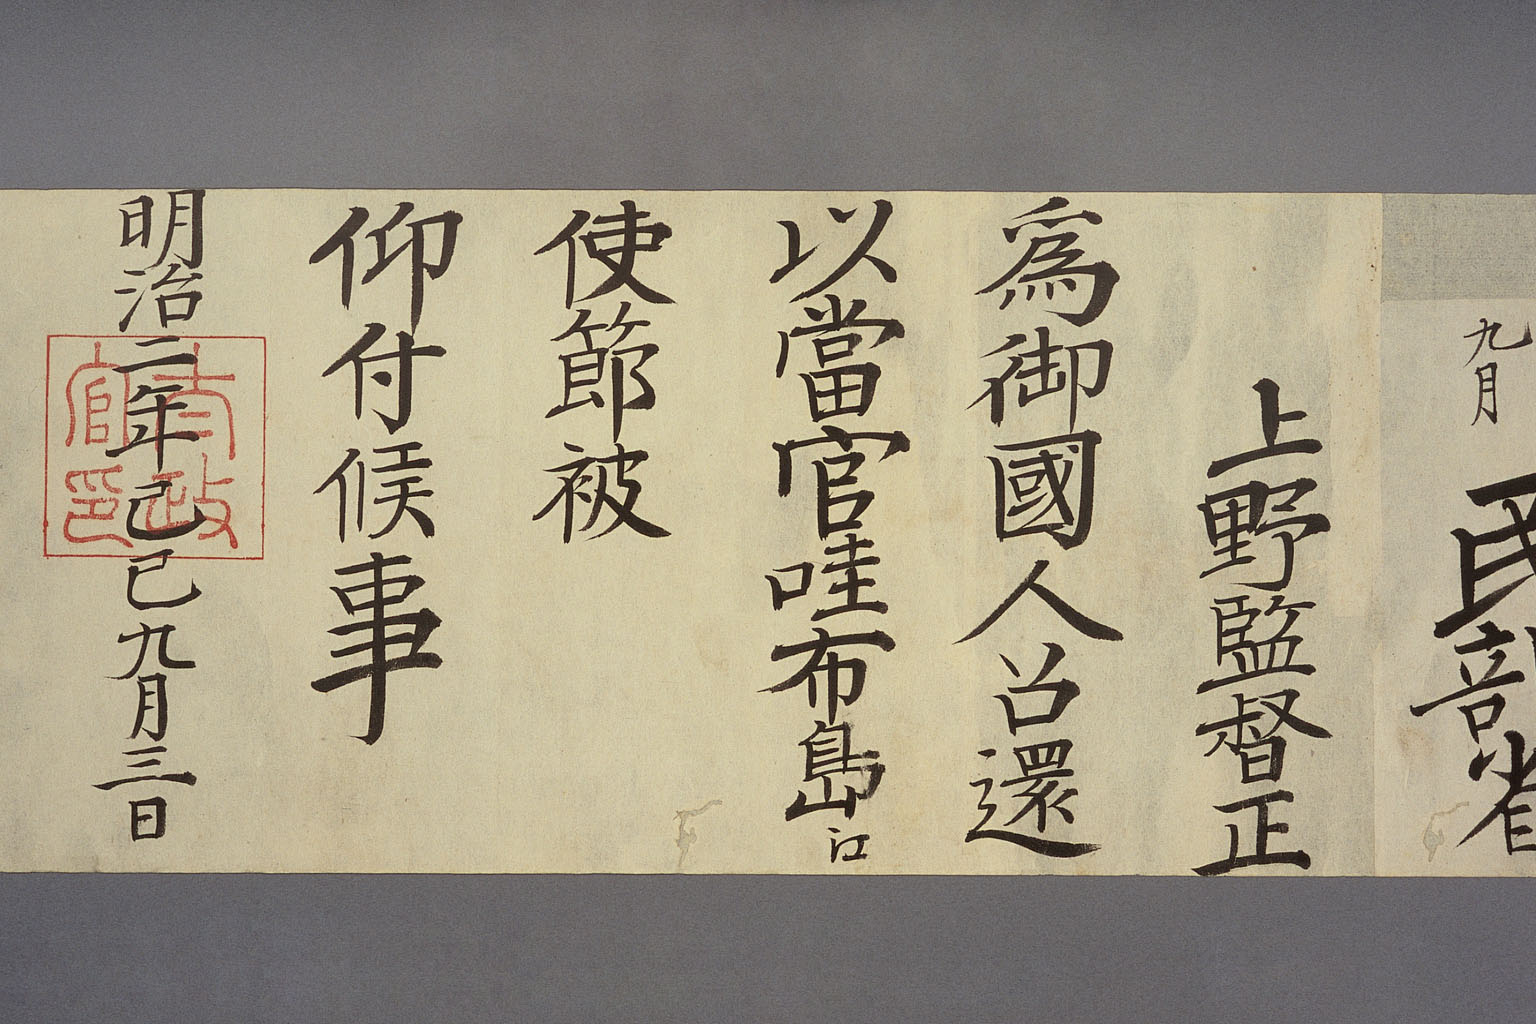 Image “Written appointment of envoy to Hawaii (director Ueno)”